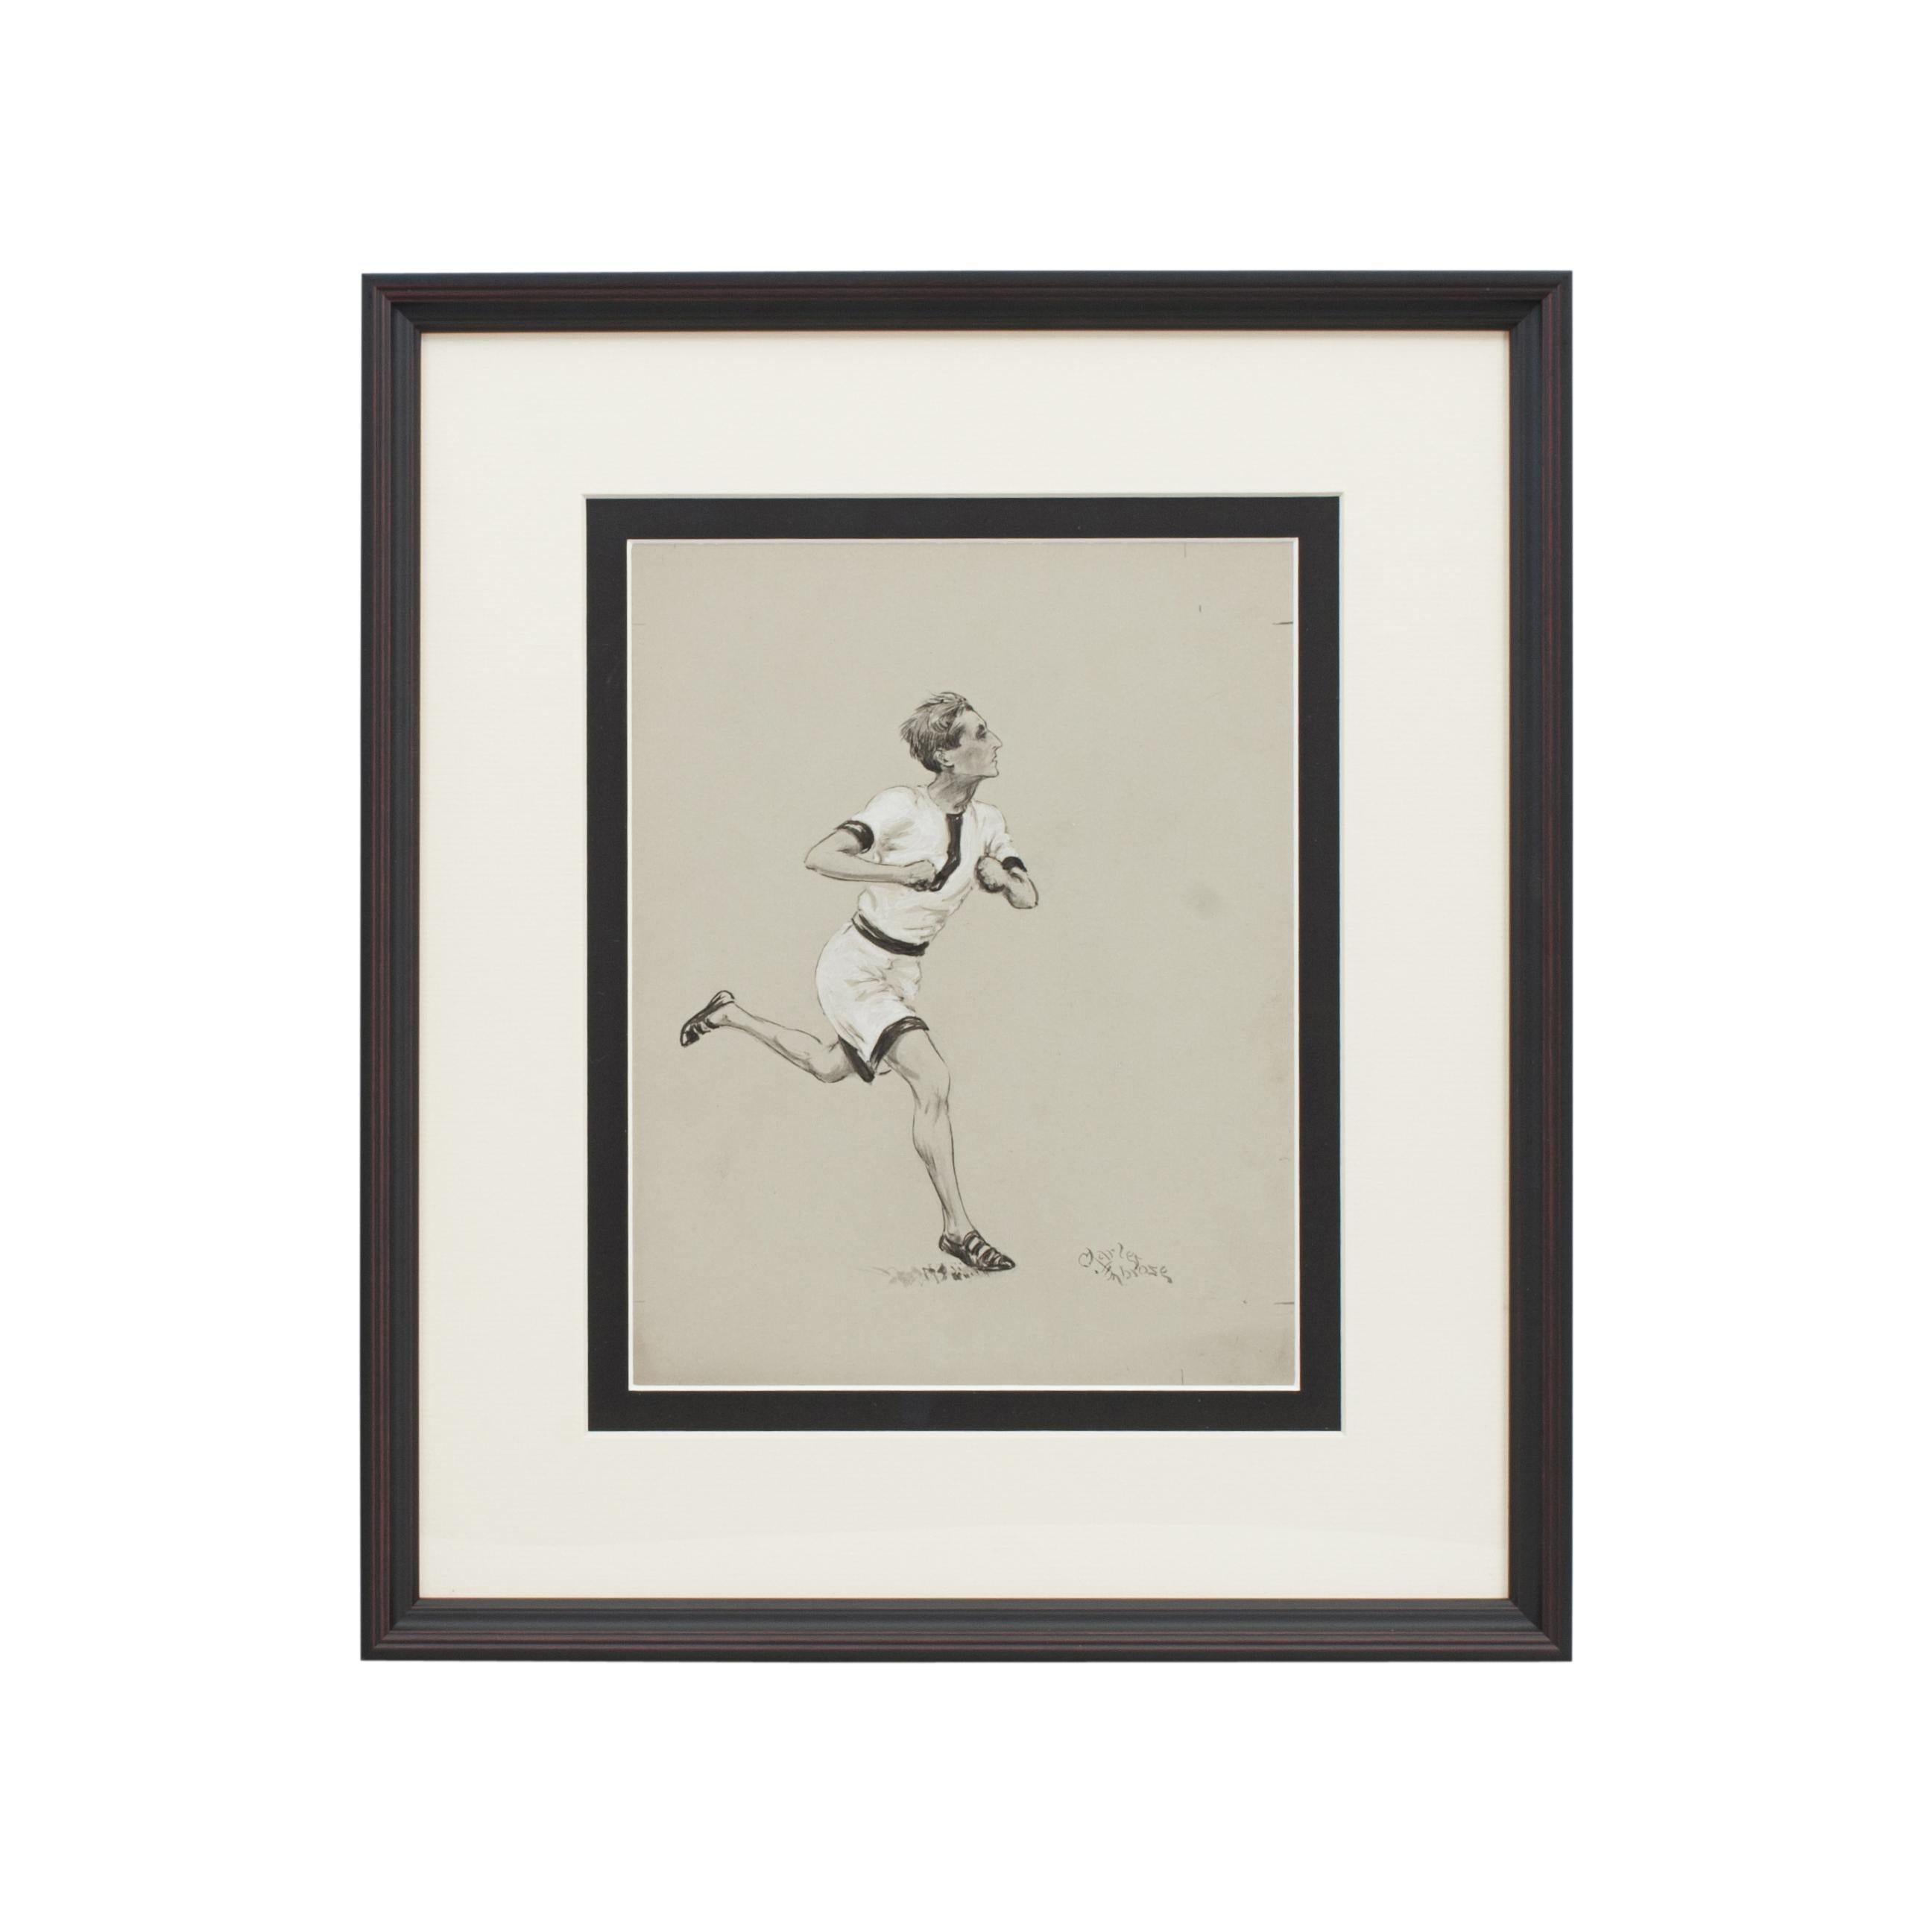 Athelitics Watercolour Paintings By Charles Ambrose. 
Original watercolor en grisaille on board of two athletic runners by Charles Ambrose. A rare subject 'Track & Field', a very difficult sport to find early original artwork of, so this is a great